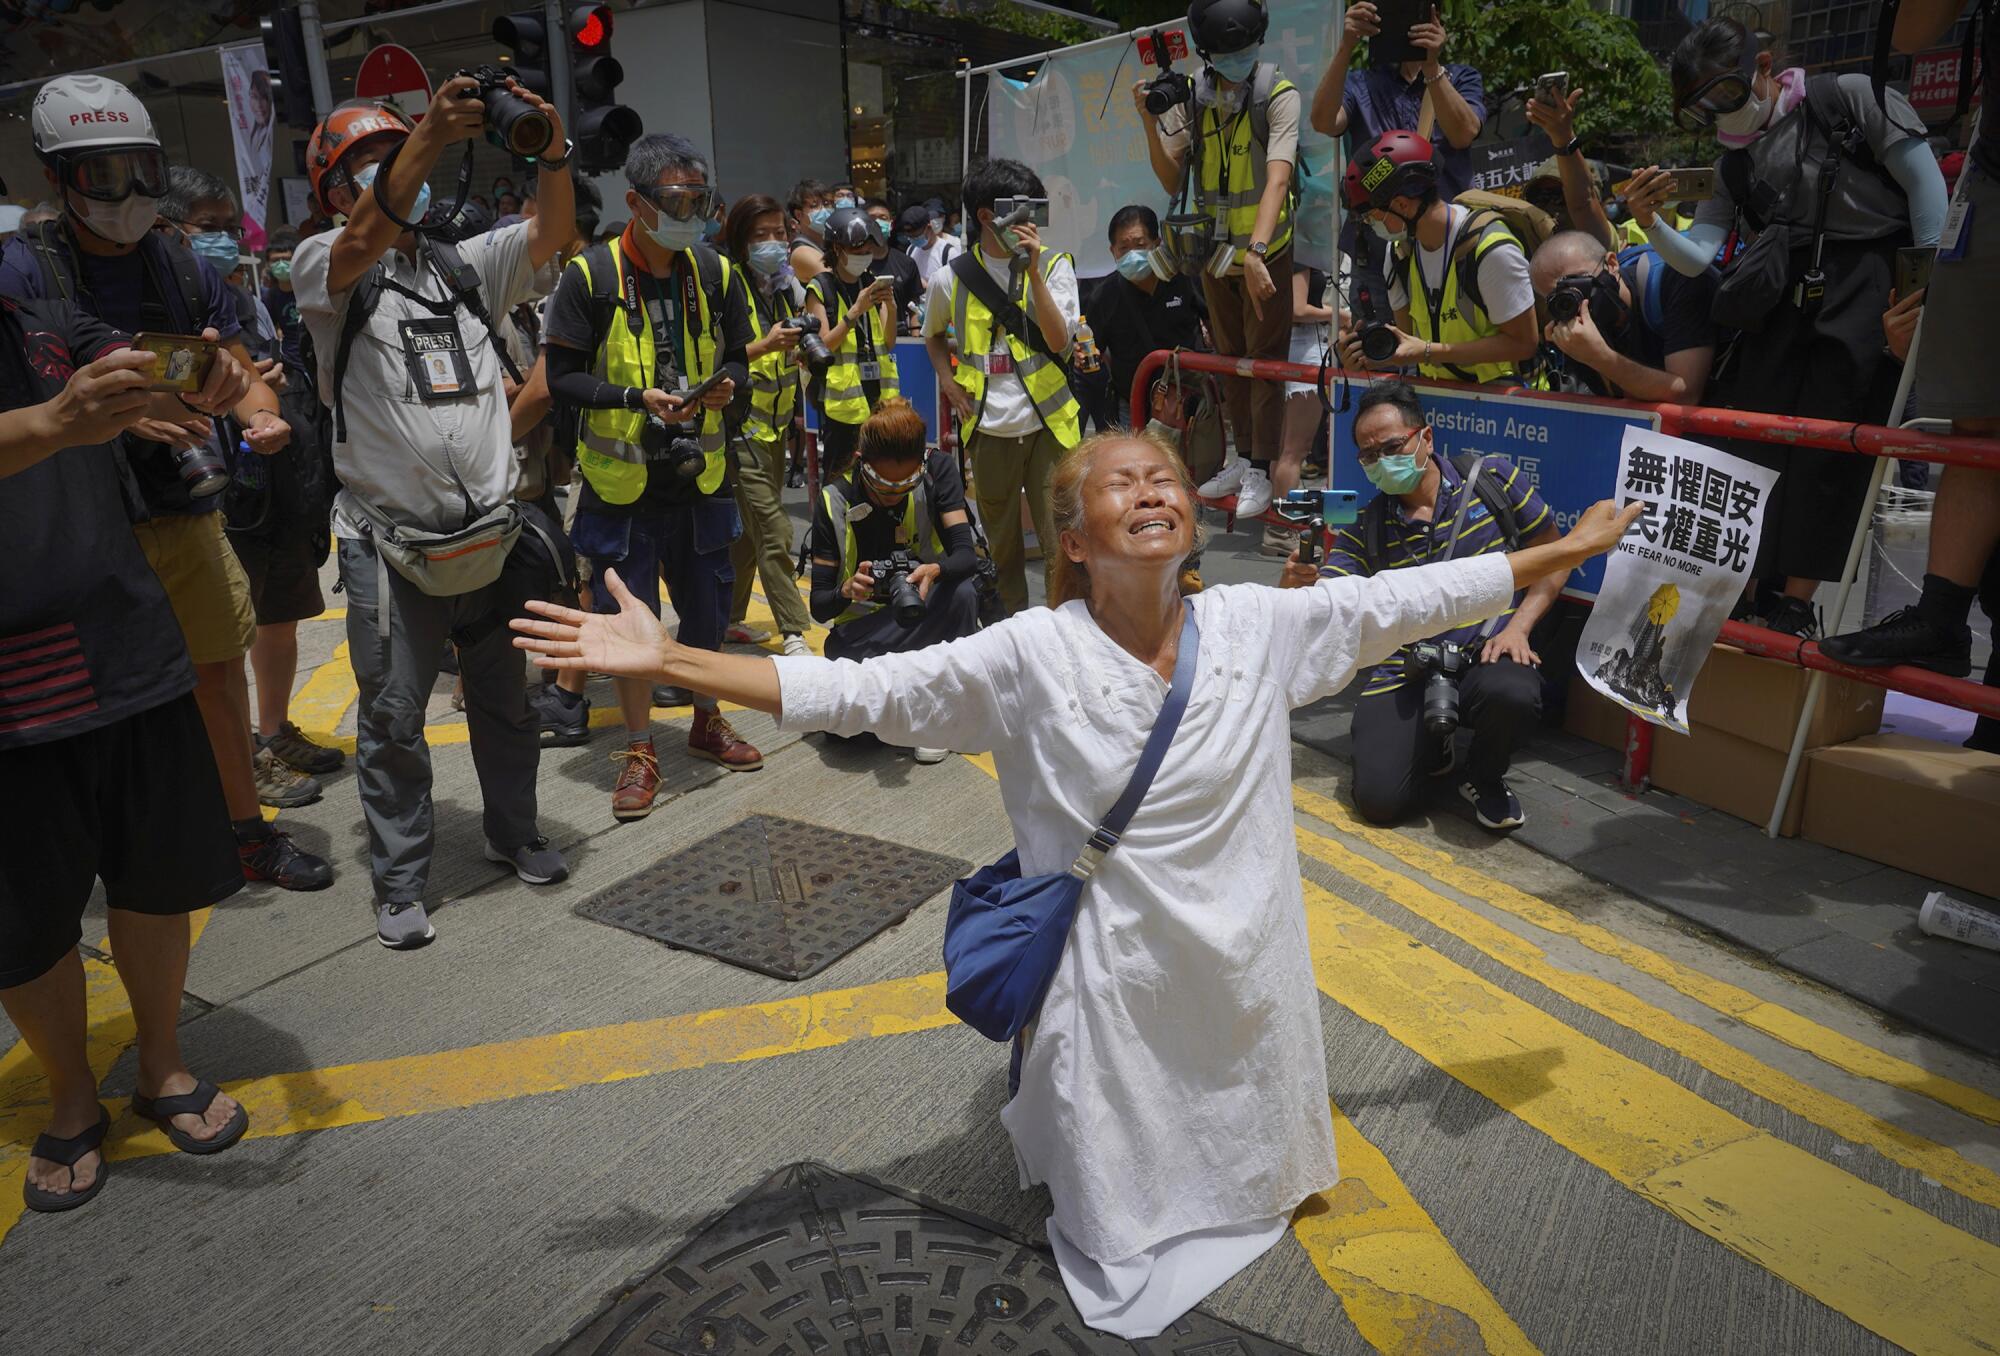 A woman prays in front of police before the annual handover march in Hong Kong on Wednesday.